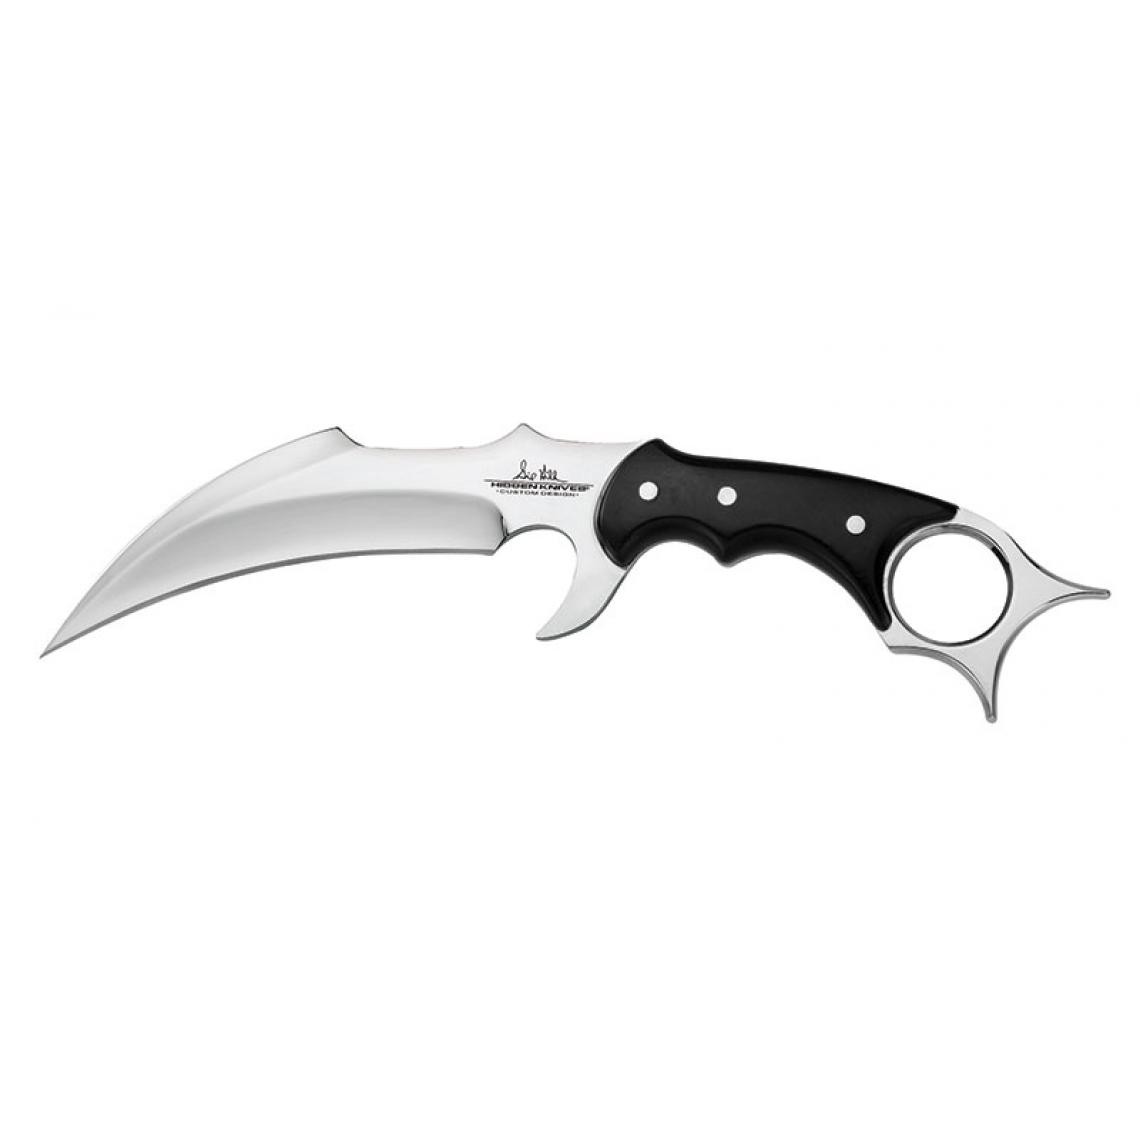 United - UNITED - GH5054 - KARAMBIT - Outils de coupe